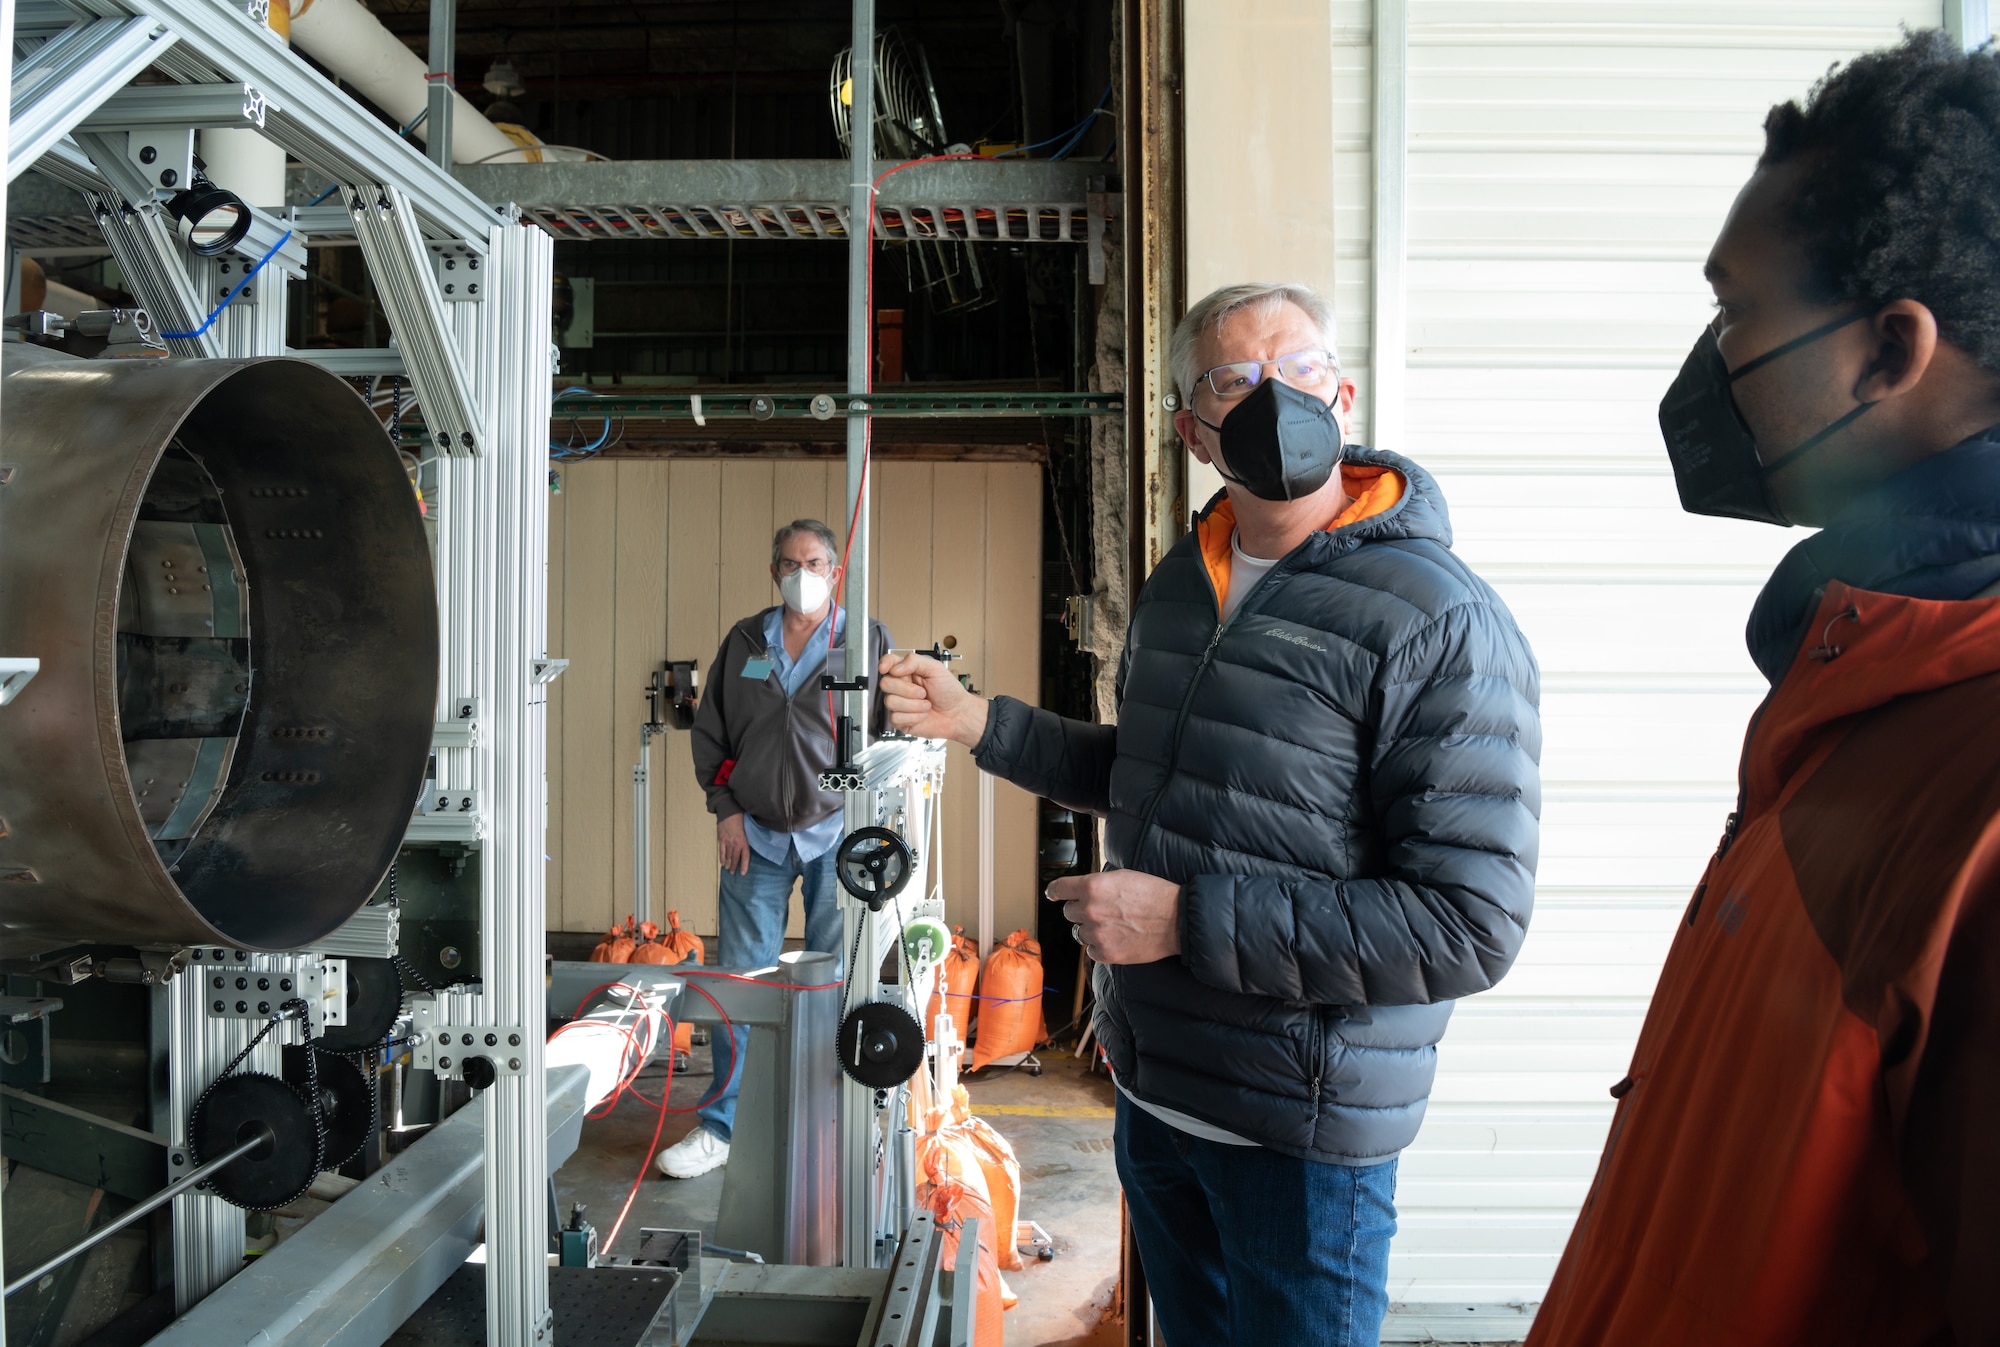 During a break in testing, Dr. Tom Jenkins, center, president of MetroLaser, Inc., explains to Dr. David Mayo, with the Naval Air Warfare Center Aircraft Division, how the cameras are adjusted to best capture the particulates of exhaust from an aircraft engine at the Propulsion Research Facility.